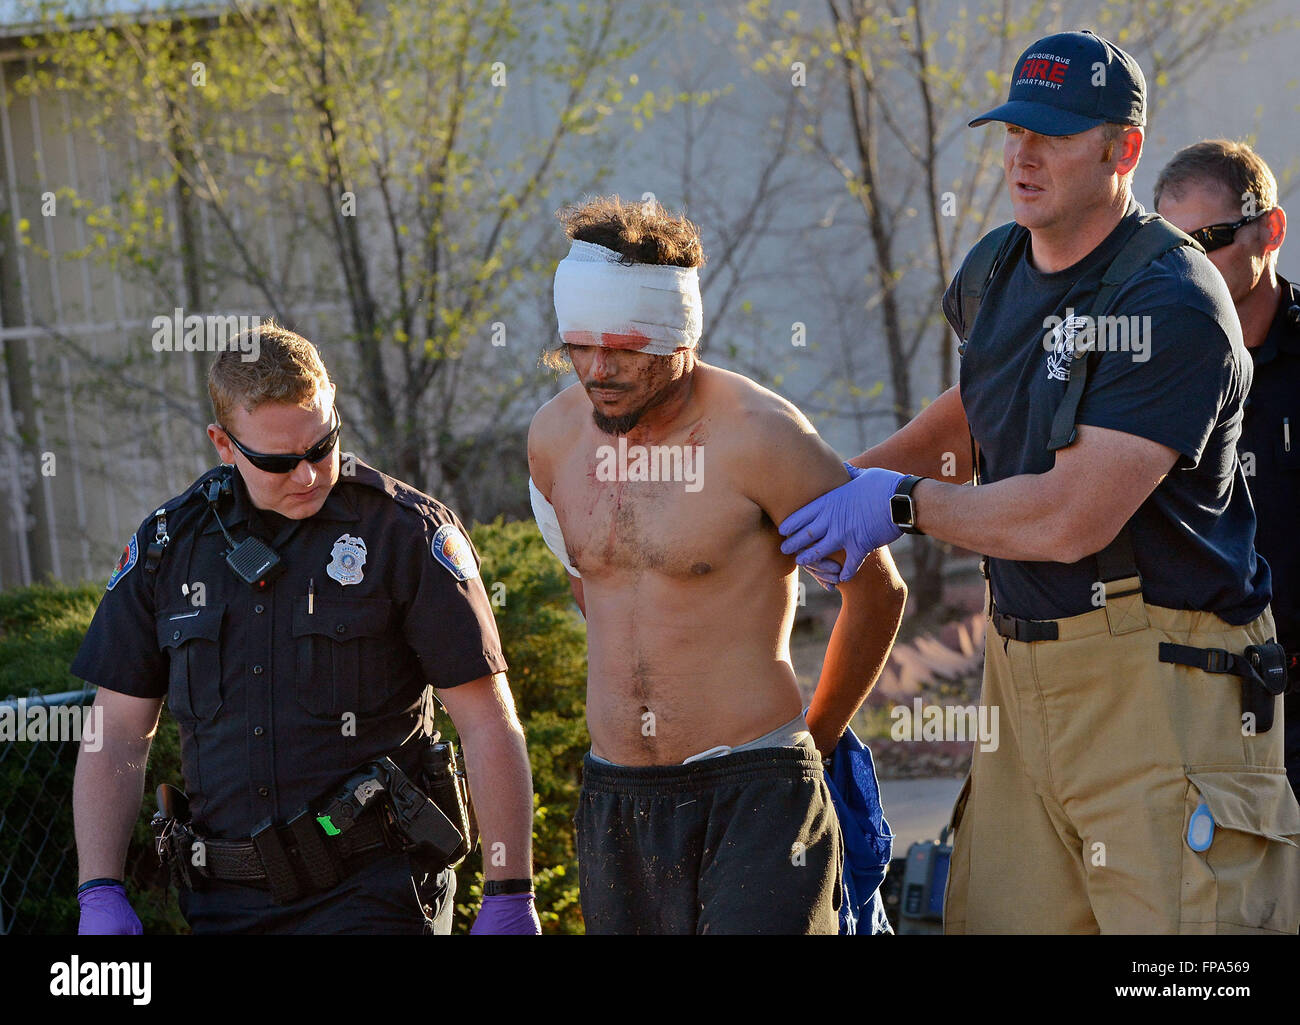 Albuquerque, NM, USA. 17th Mar, 2016. APD officer D. Kisser and AFD firefighter David Auge from station 9 escort Joseph Terrell to the squad car to be transported to the hospital for his wounds he received from a police dog after he refused to come out from hiding. Saturday, Mar. 12, 2016. © Jim Thompson/Albuquerque Journal/ZUMA Wire/Alamy Live News Stock Photo